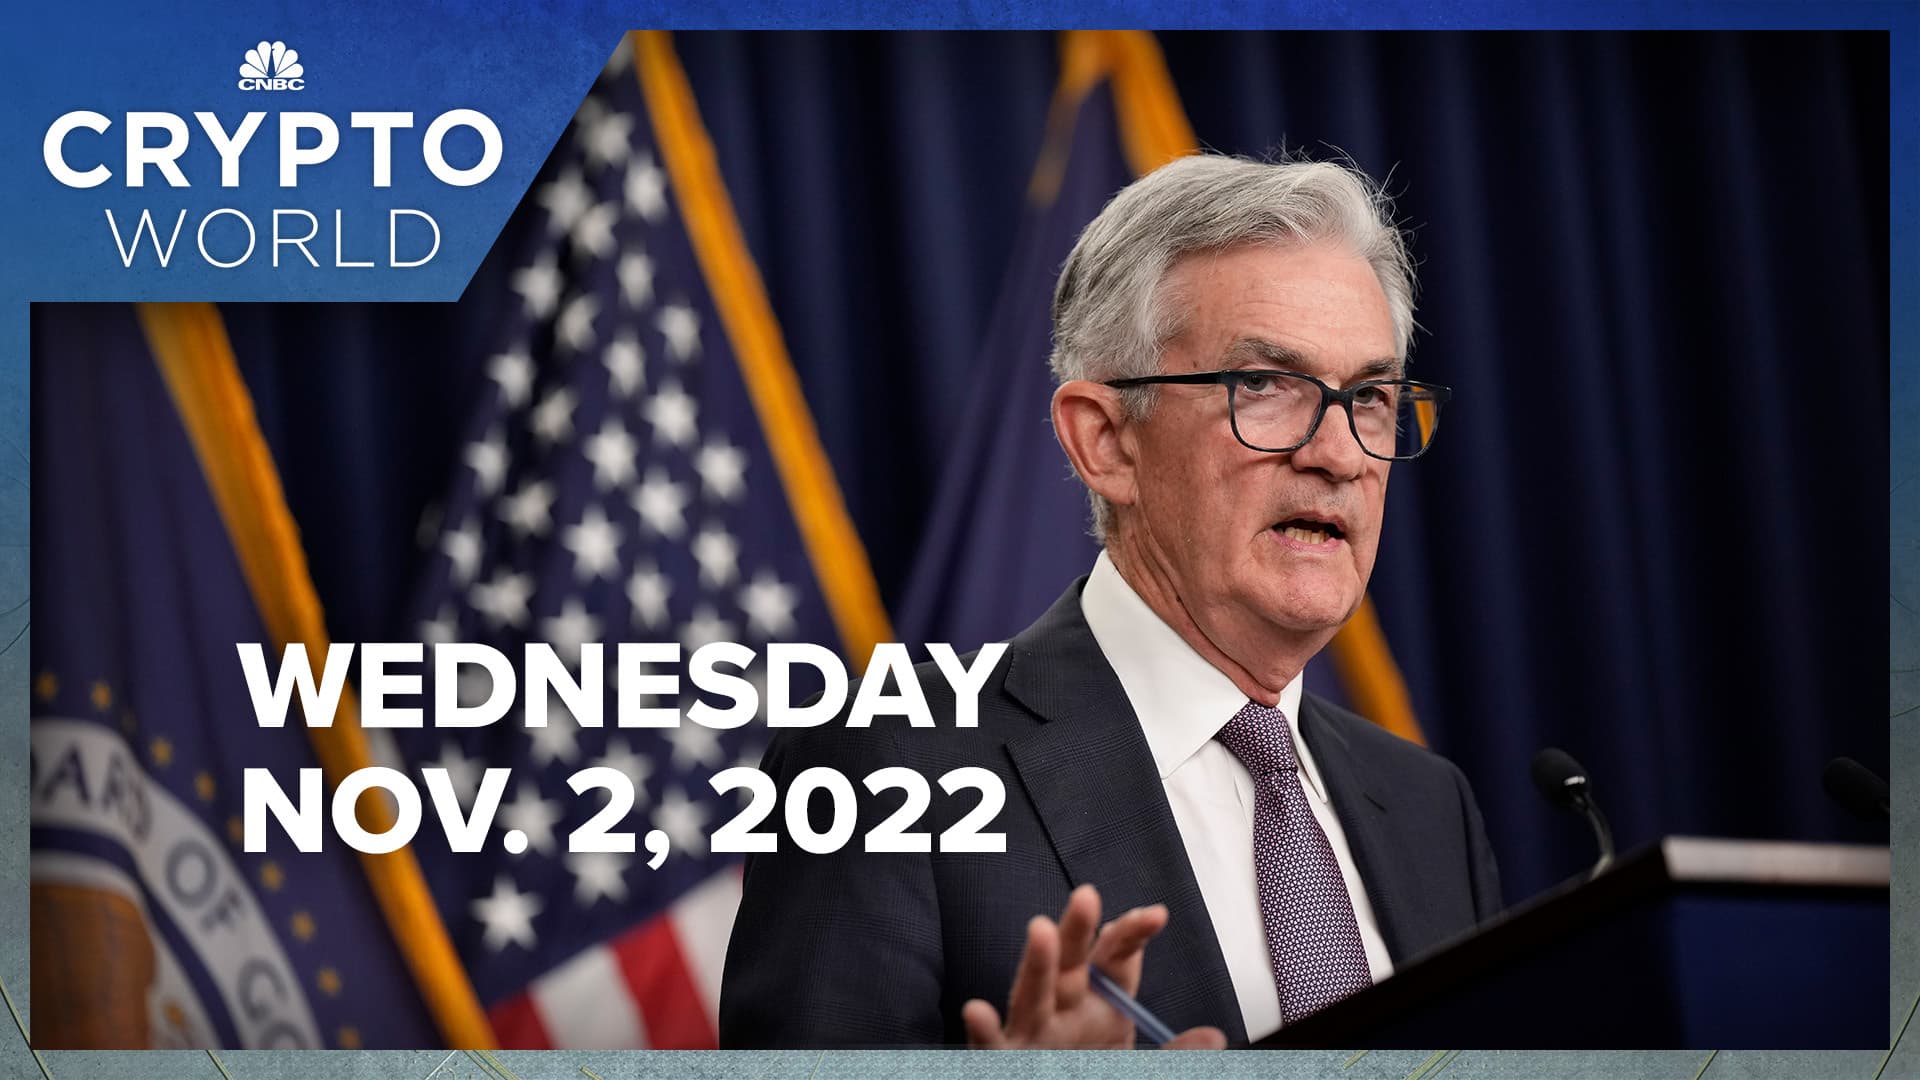 bitcoin-rises-as-fed-hints-at-policy-shift-and-bitdeer-delays-wall-street-debut-cnbc-crypto-world